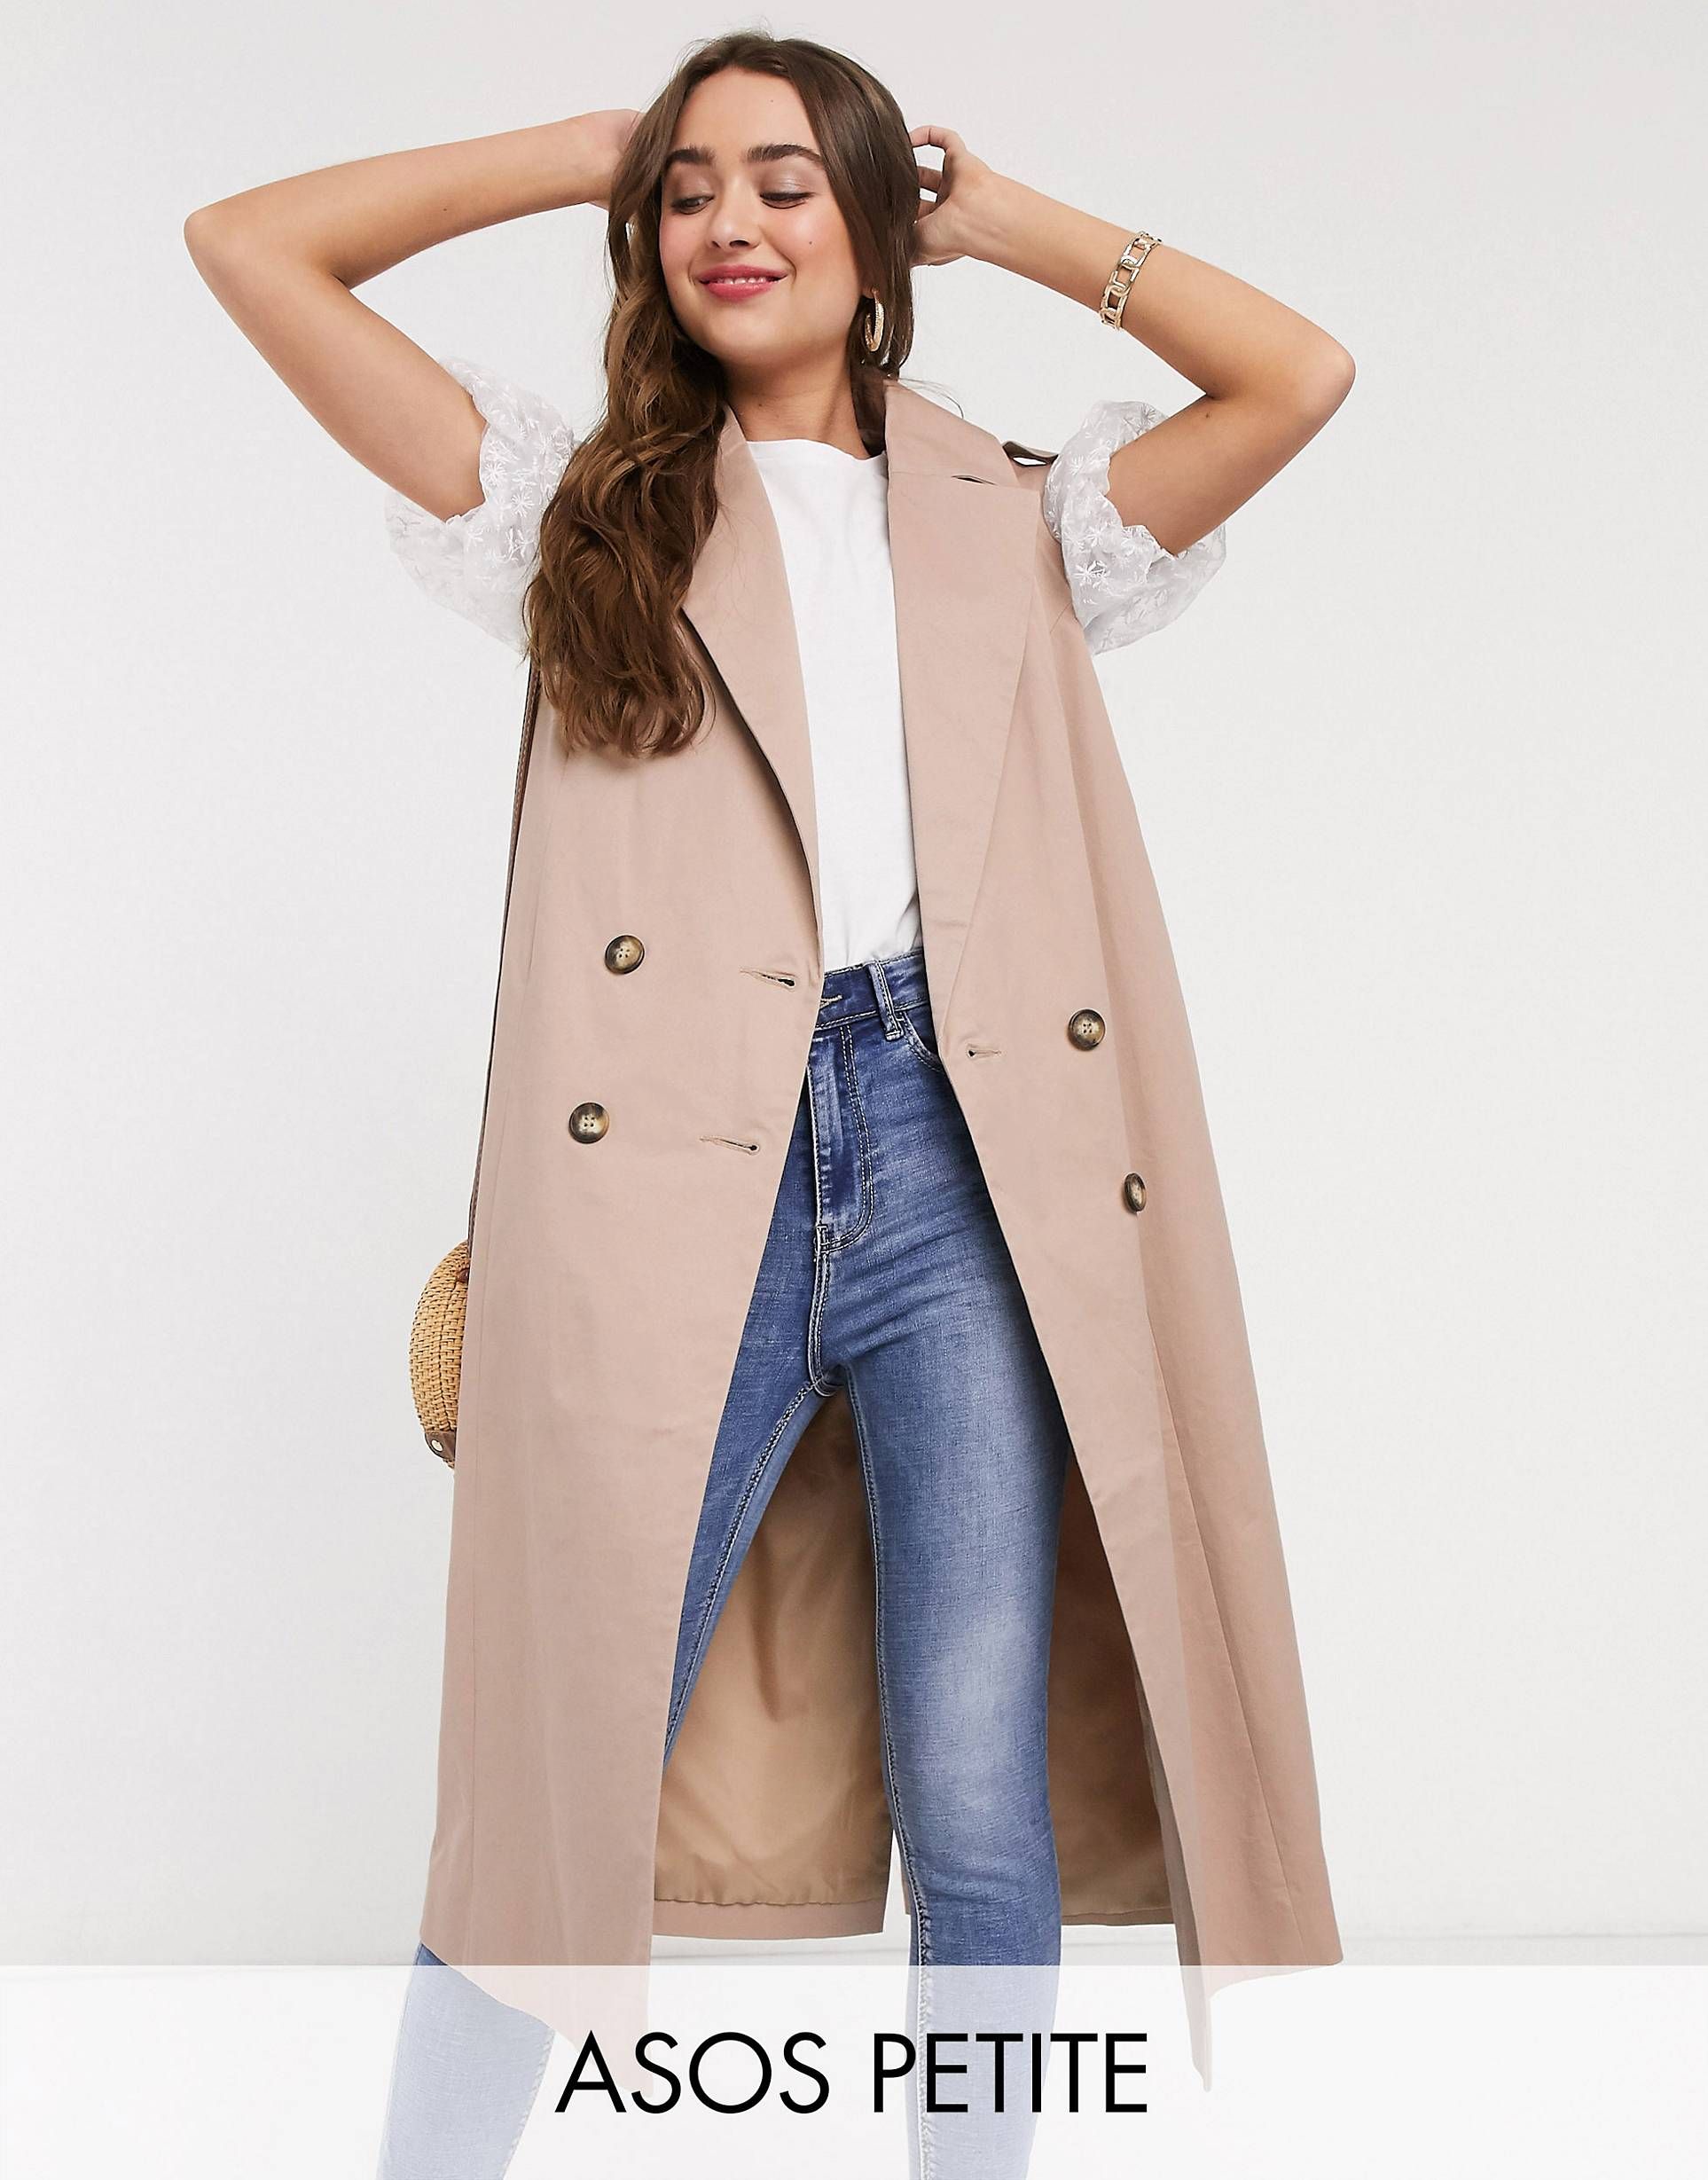 Sleeveless Trench Coat Outfit
  Ideas for Women